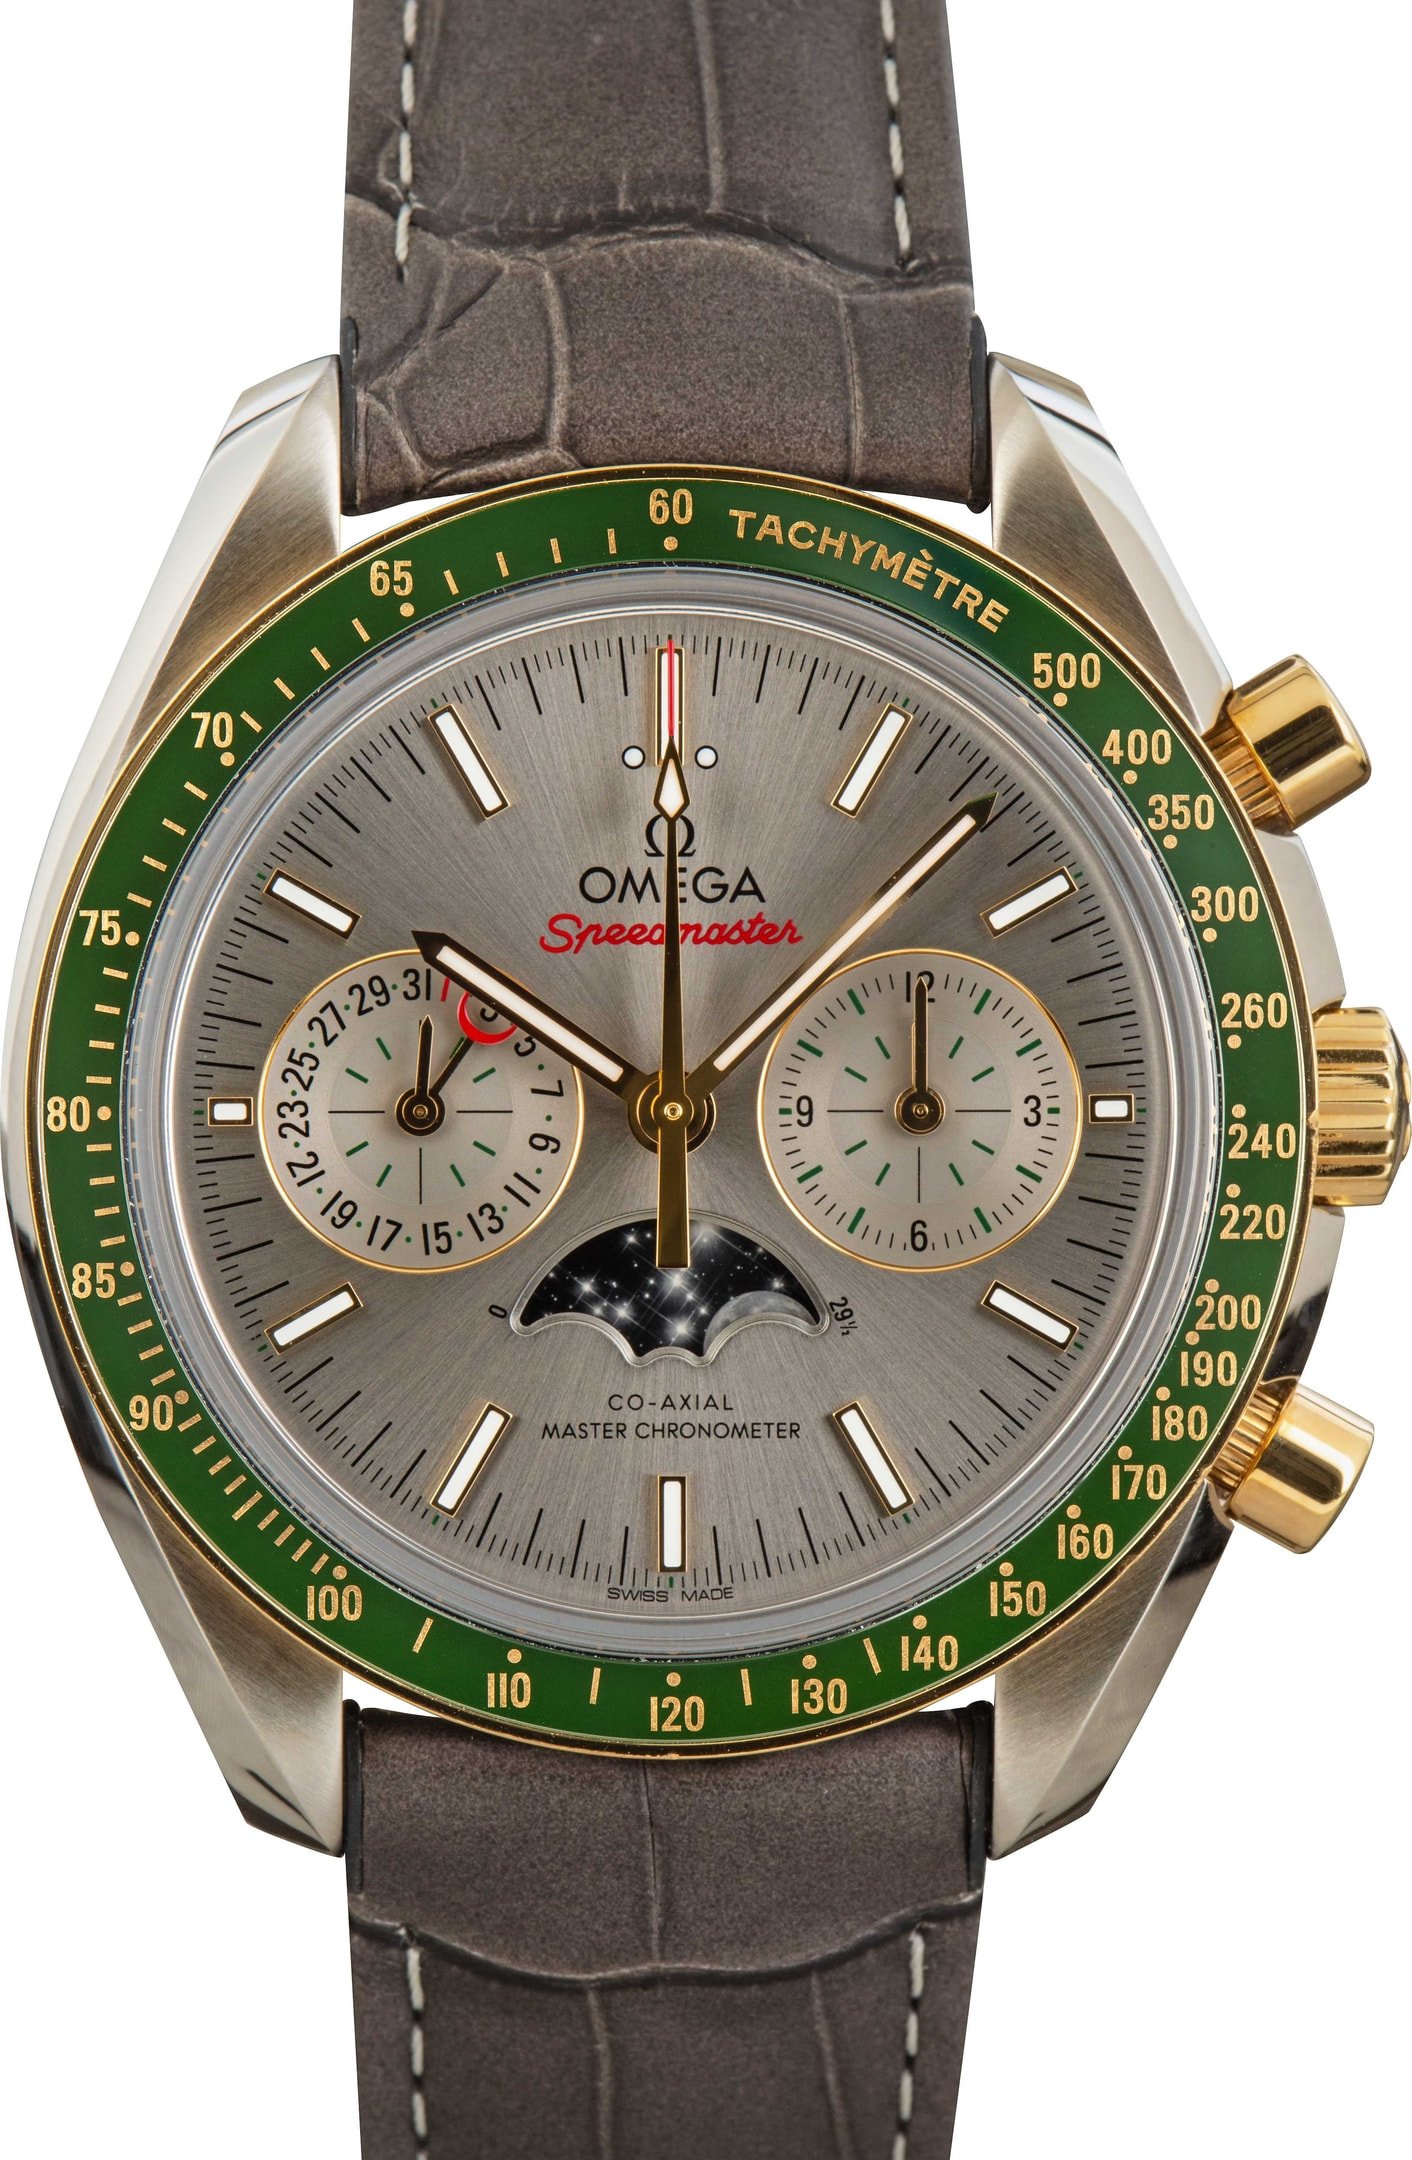 Omega Speedmaster Two Tone - BobsWatches.com